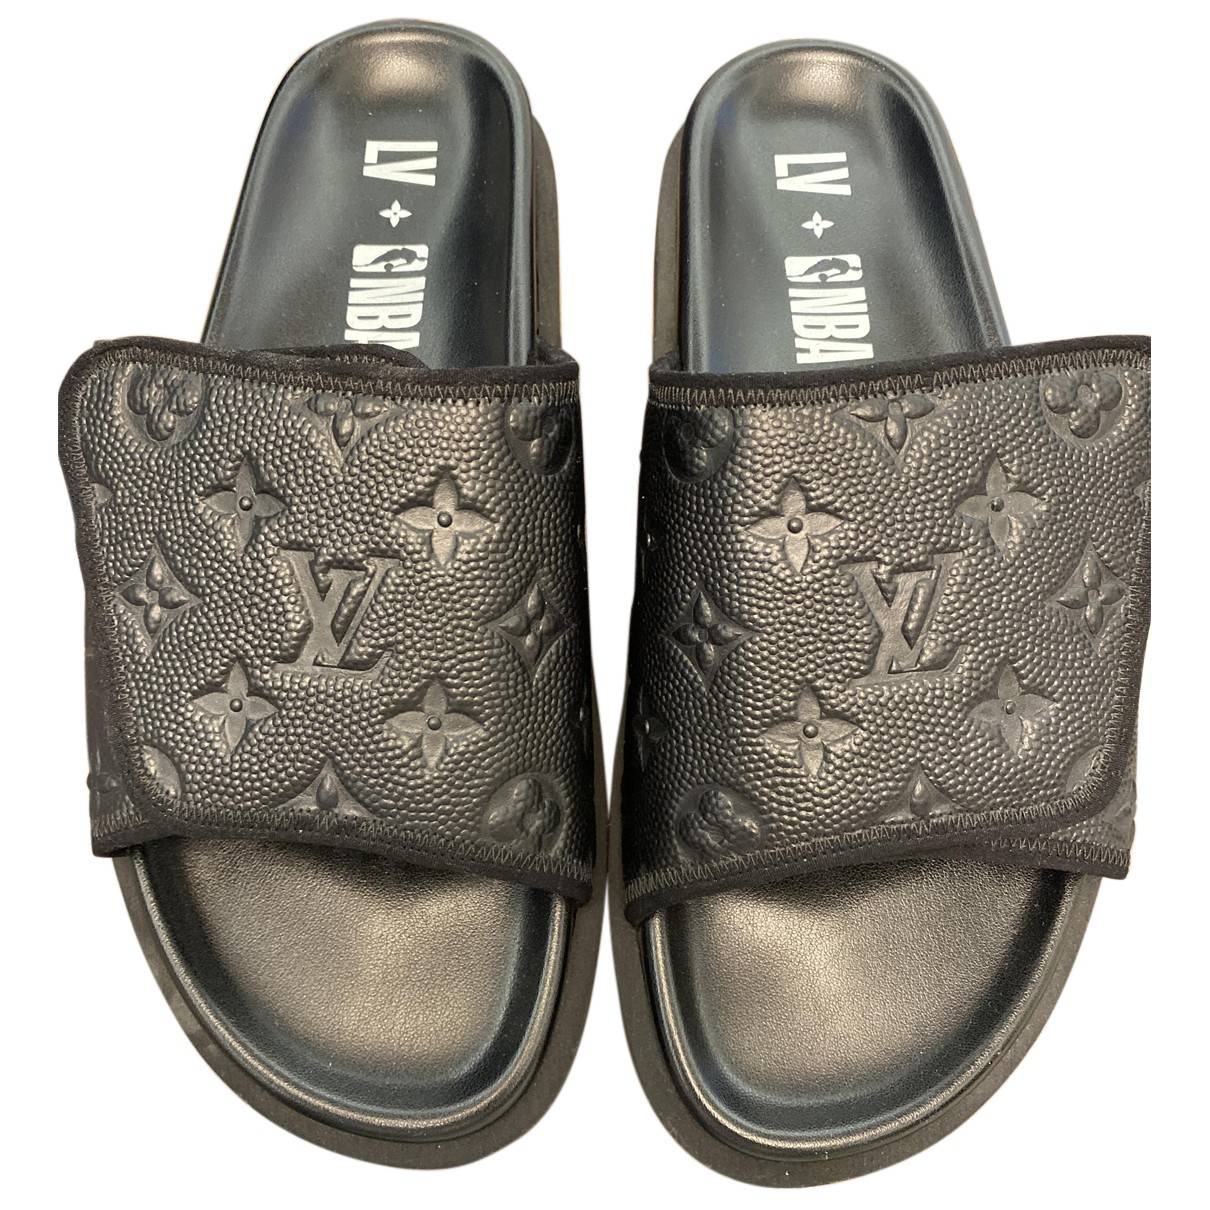 Leather sandals Louis Vuitton X NBA Black size 9.5 US in Leather - 20249569